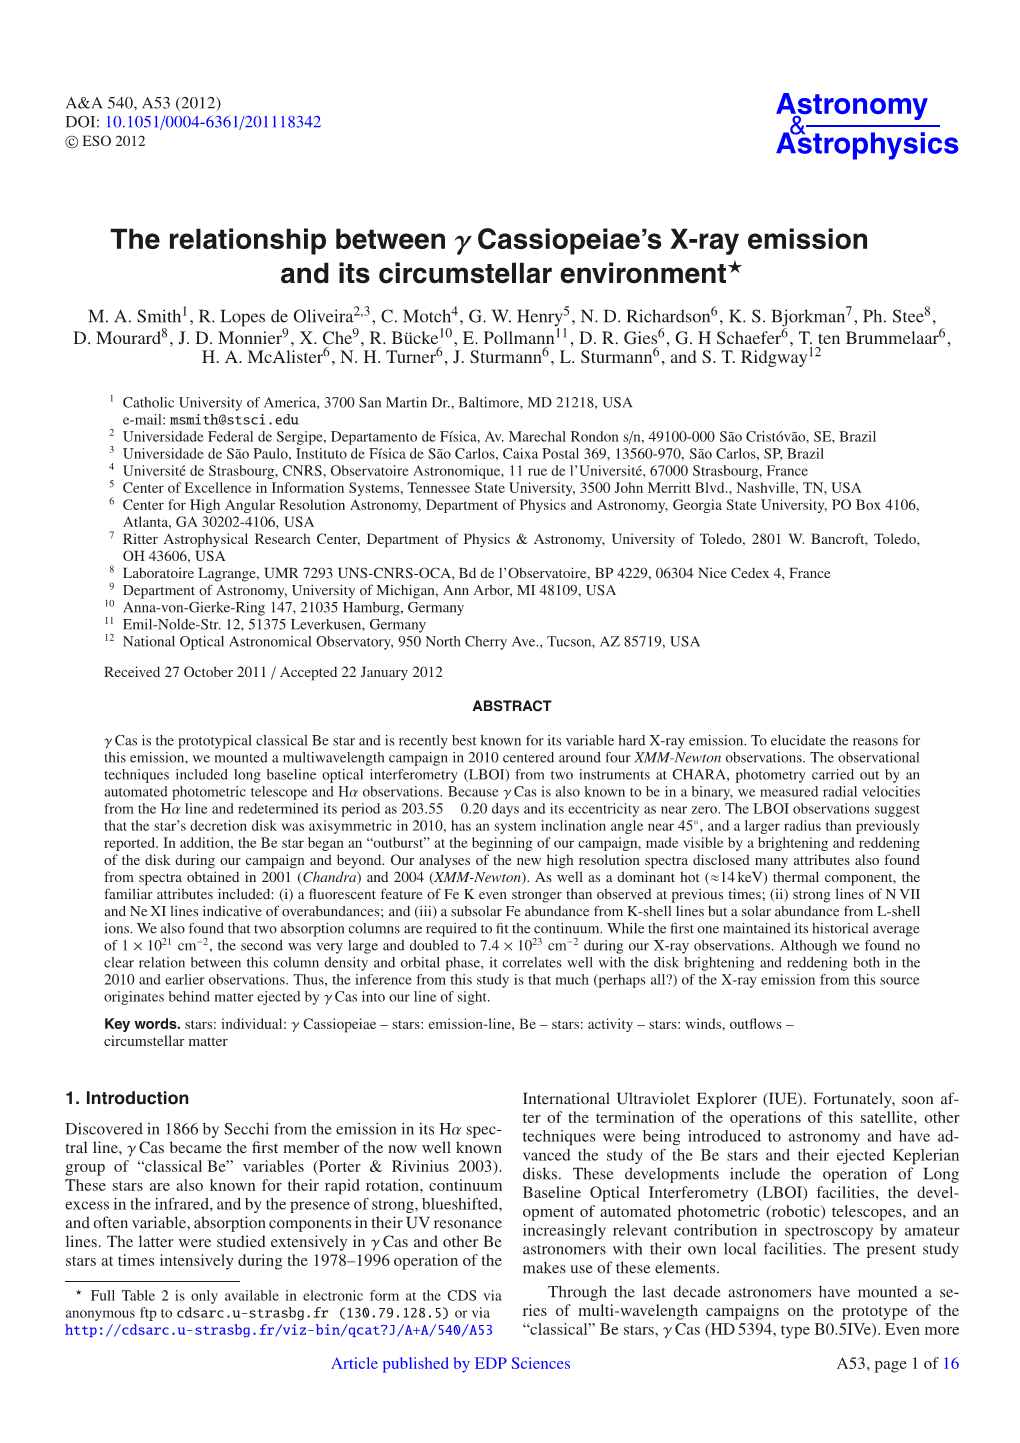 The Relationship Between Γ Cassiopeiae's X-Ray Emission And